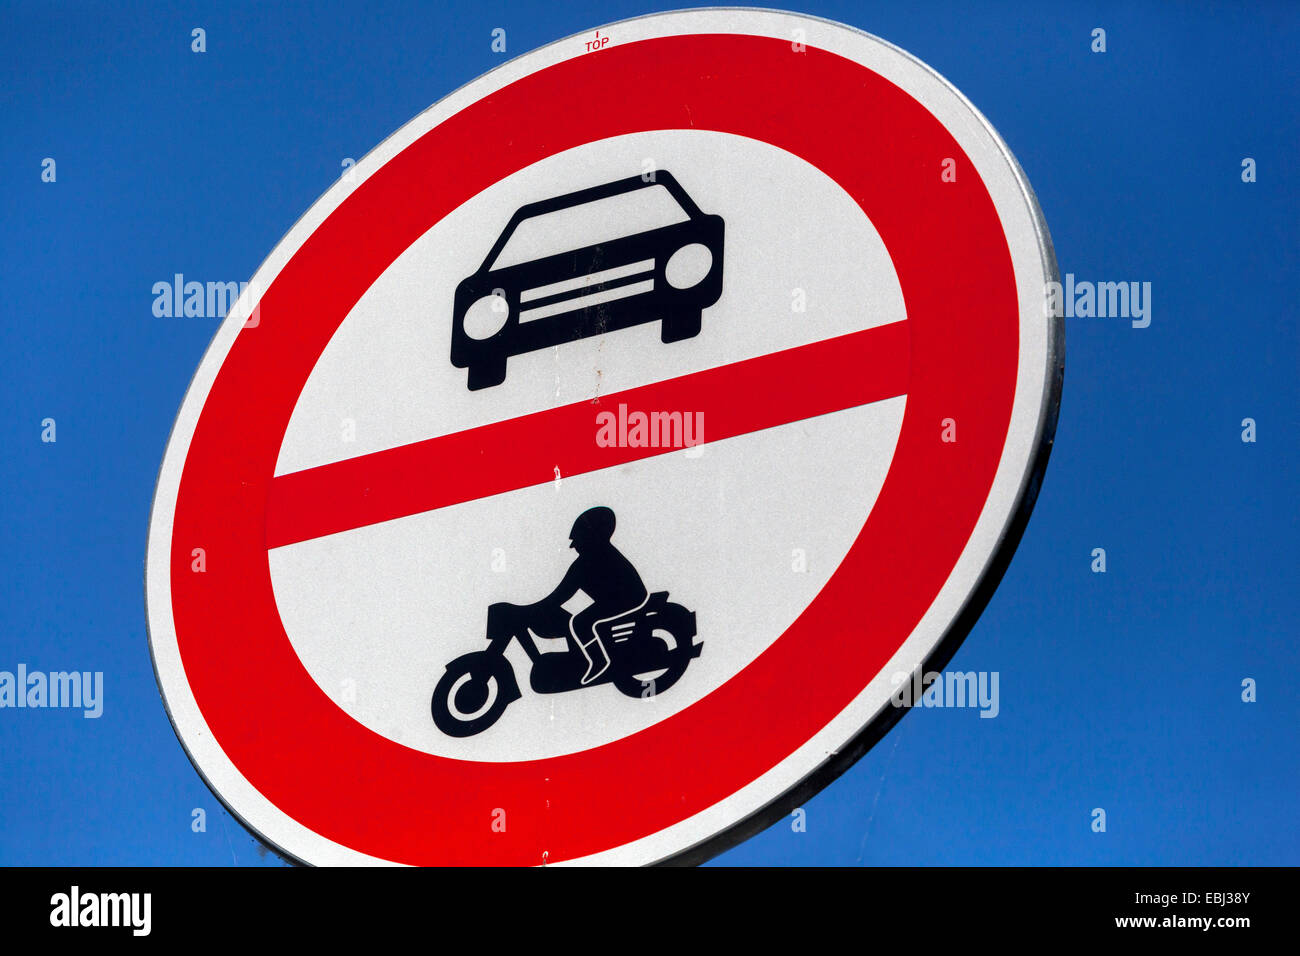 Road sign showing no entry for cars or motorcycles Stock Photo